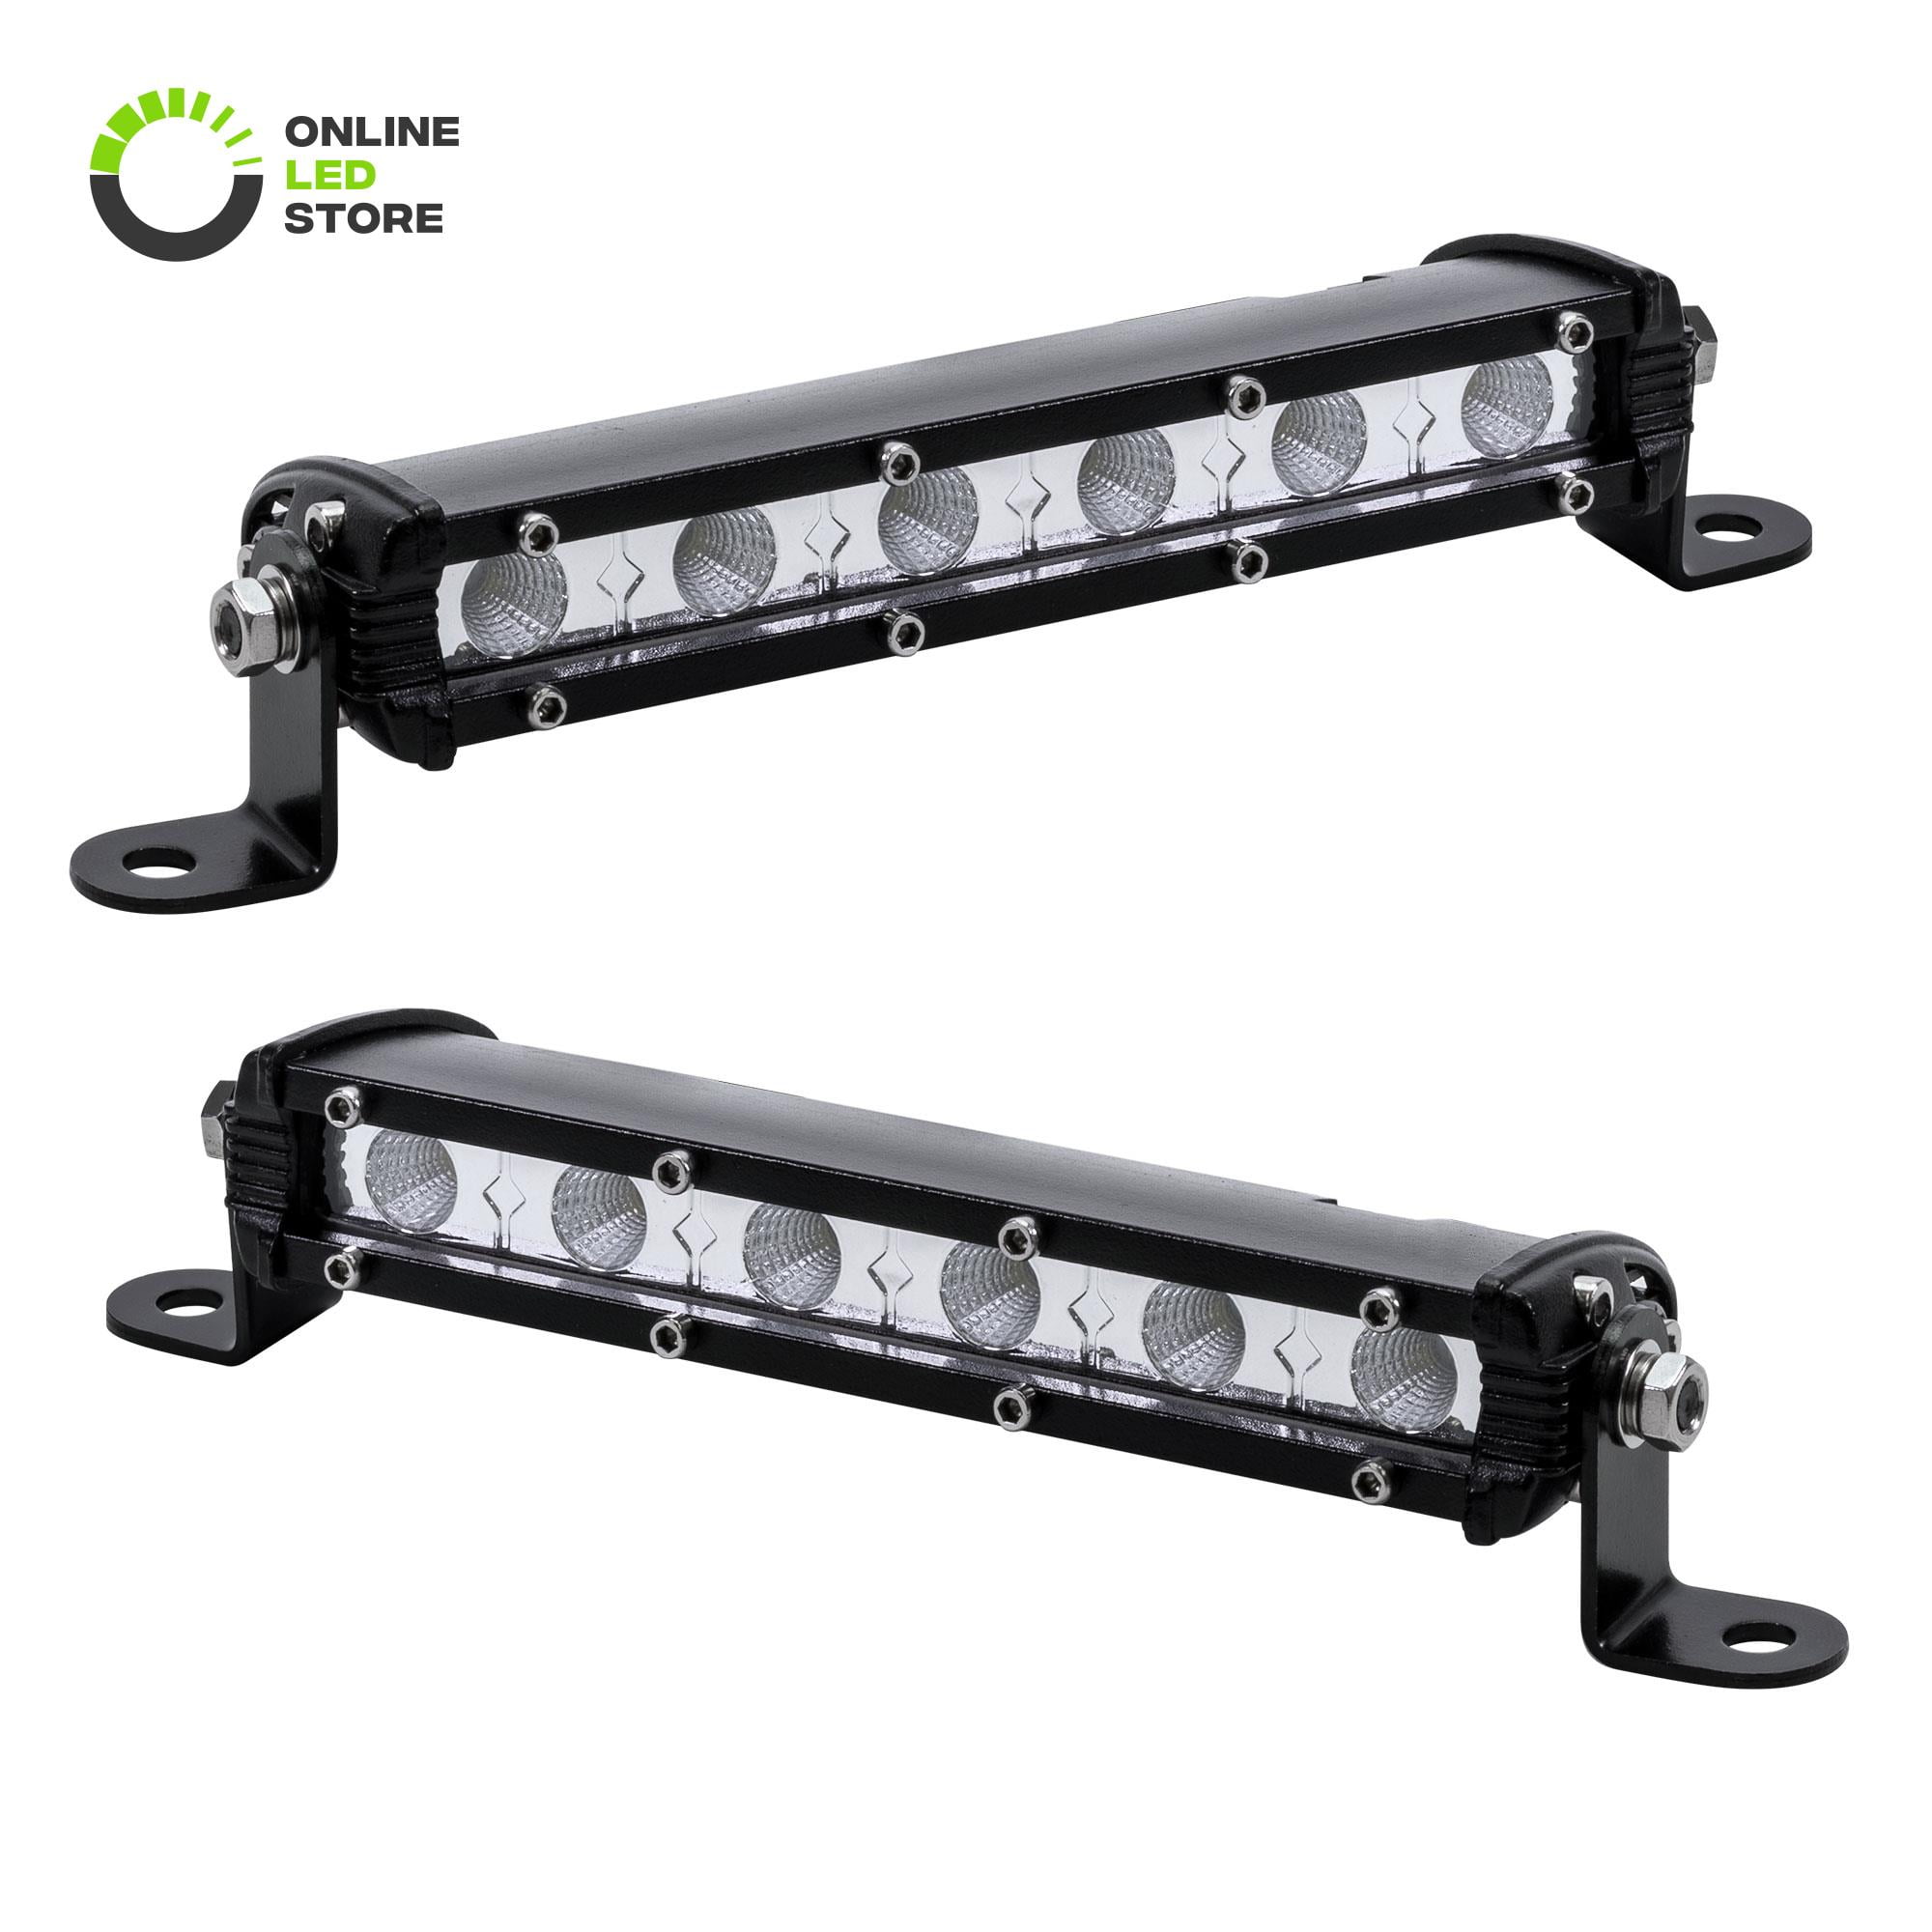 2 Pack Seekers High Powered LED Light Bar Ultra Bright 2520 Lumen Light | 7-inch 12v CREE LED Fog Lamps for Off Roading Boats Easy Install Waterproof Design 4x4 Trucks SUVs Cars and More 